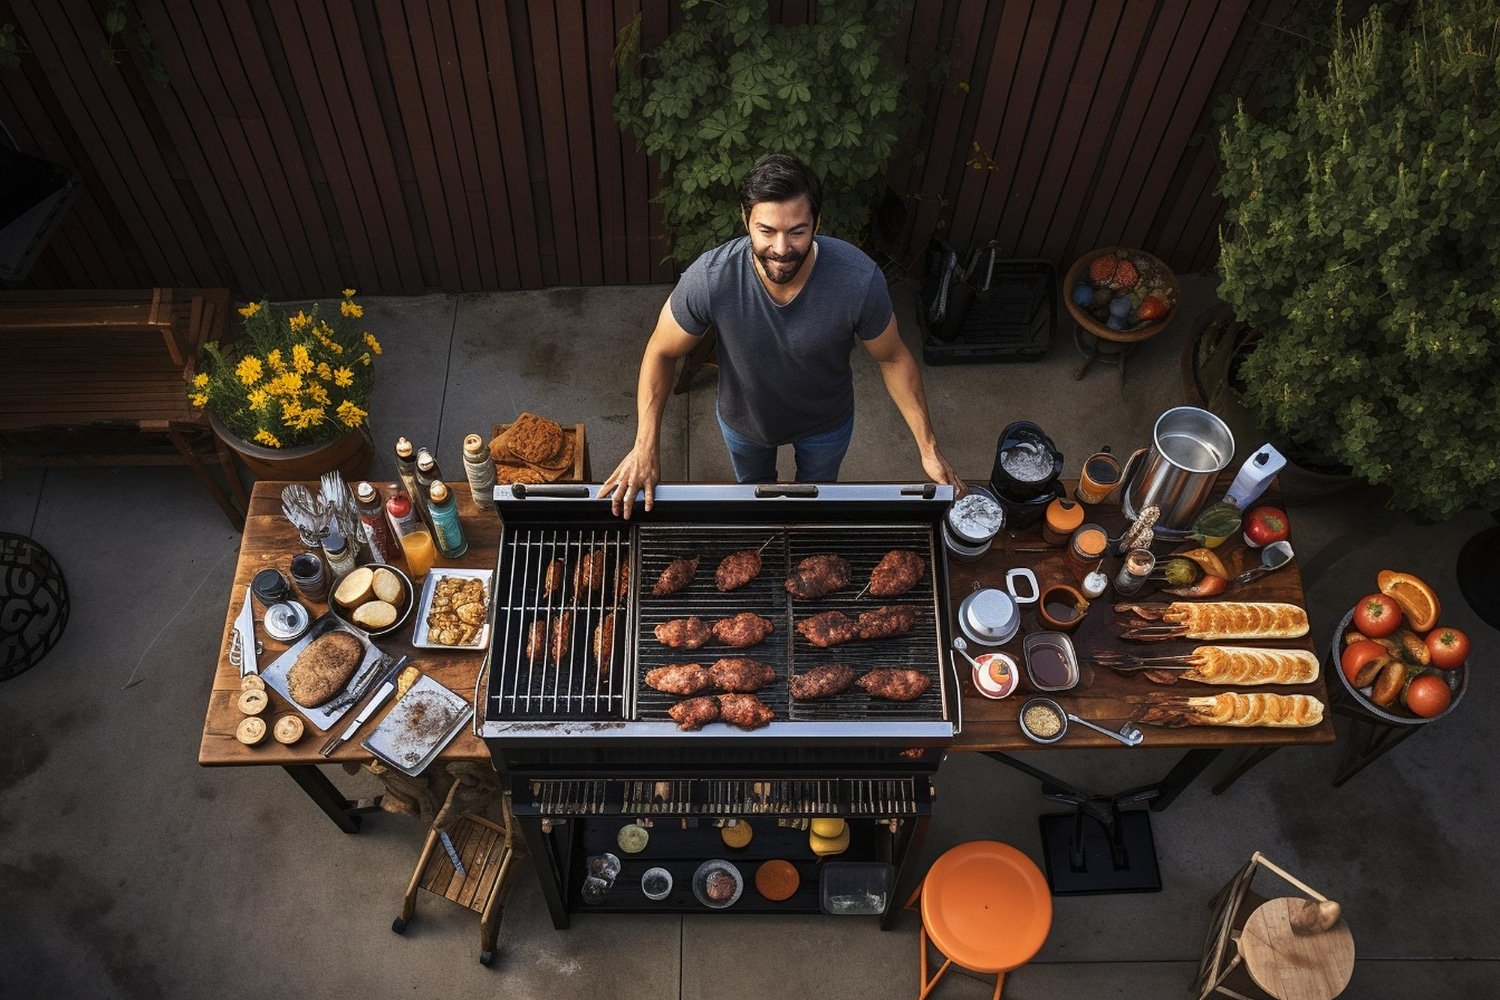 Grill Like A Pro With BBQGuys’s High-Quality Grills And Outdoor Cooking Equipment